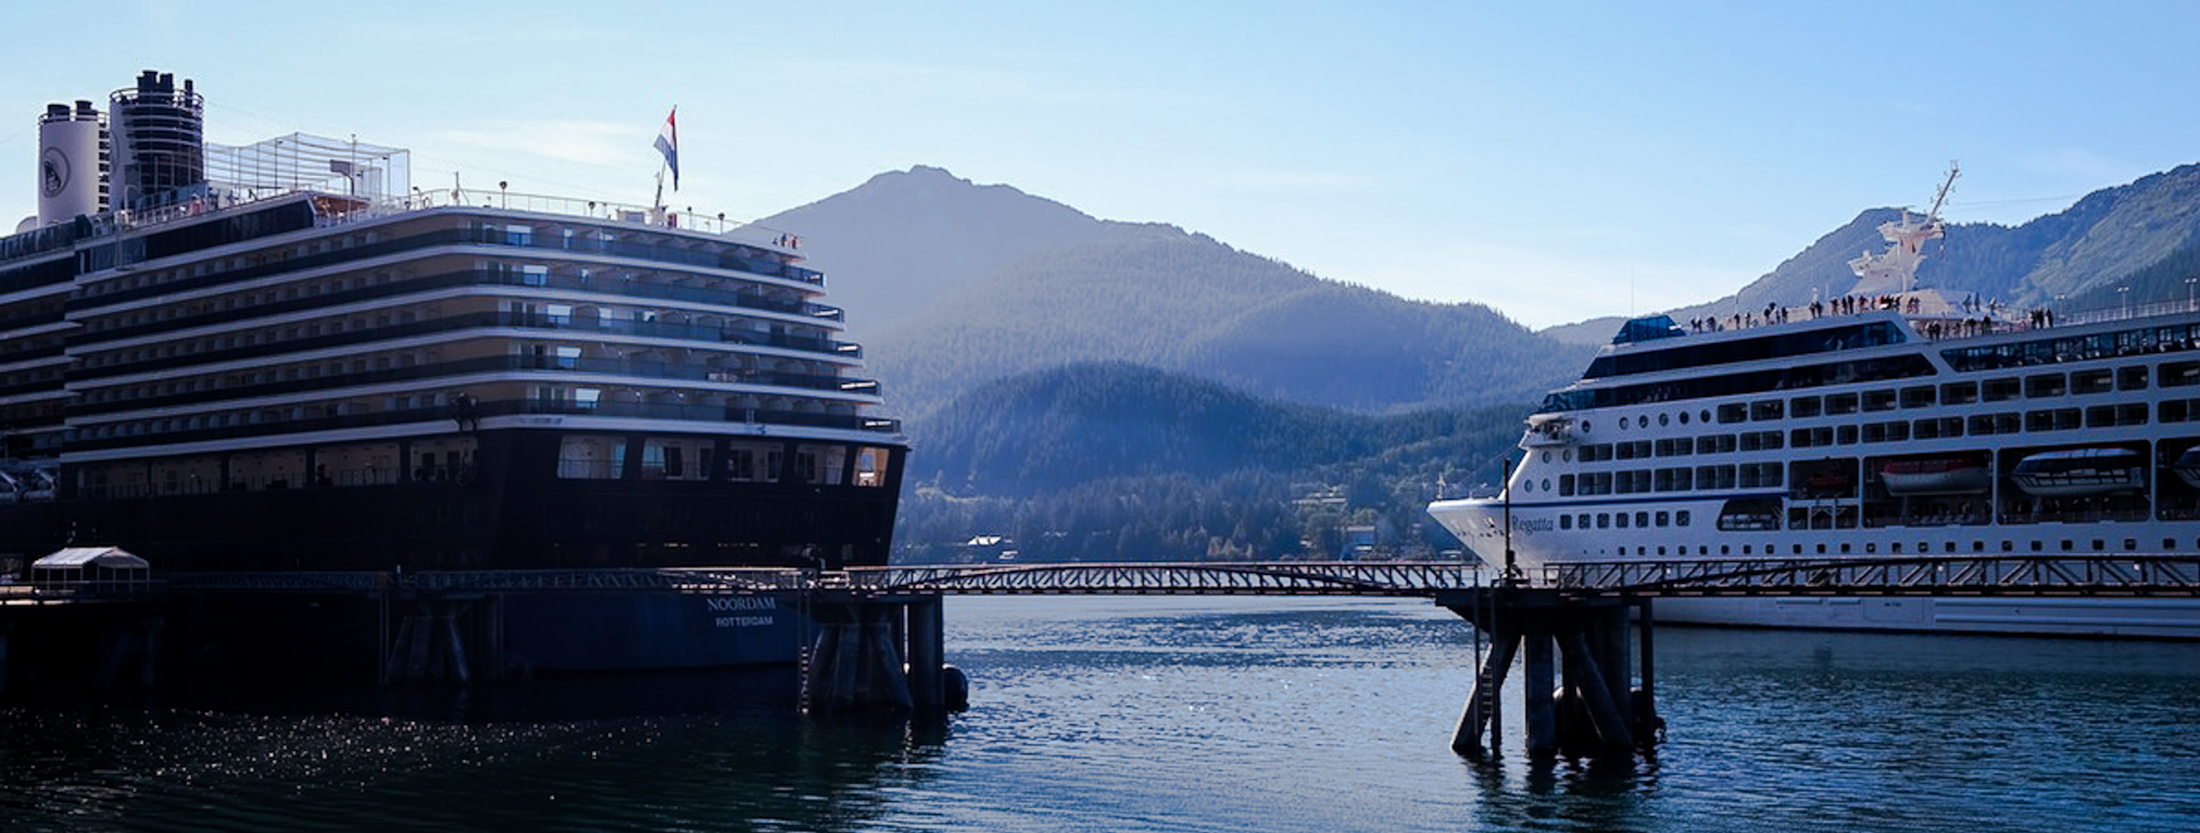 An estimated 1.1 million cruise ship passengers will disembark in Juneau this year to see the Mendenhall Glacier and other local attractions.  JONAA©Mia Bennett